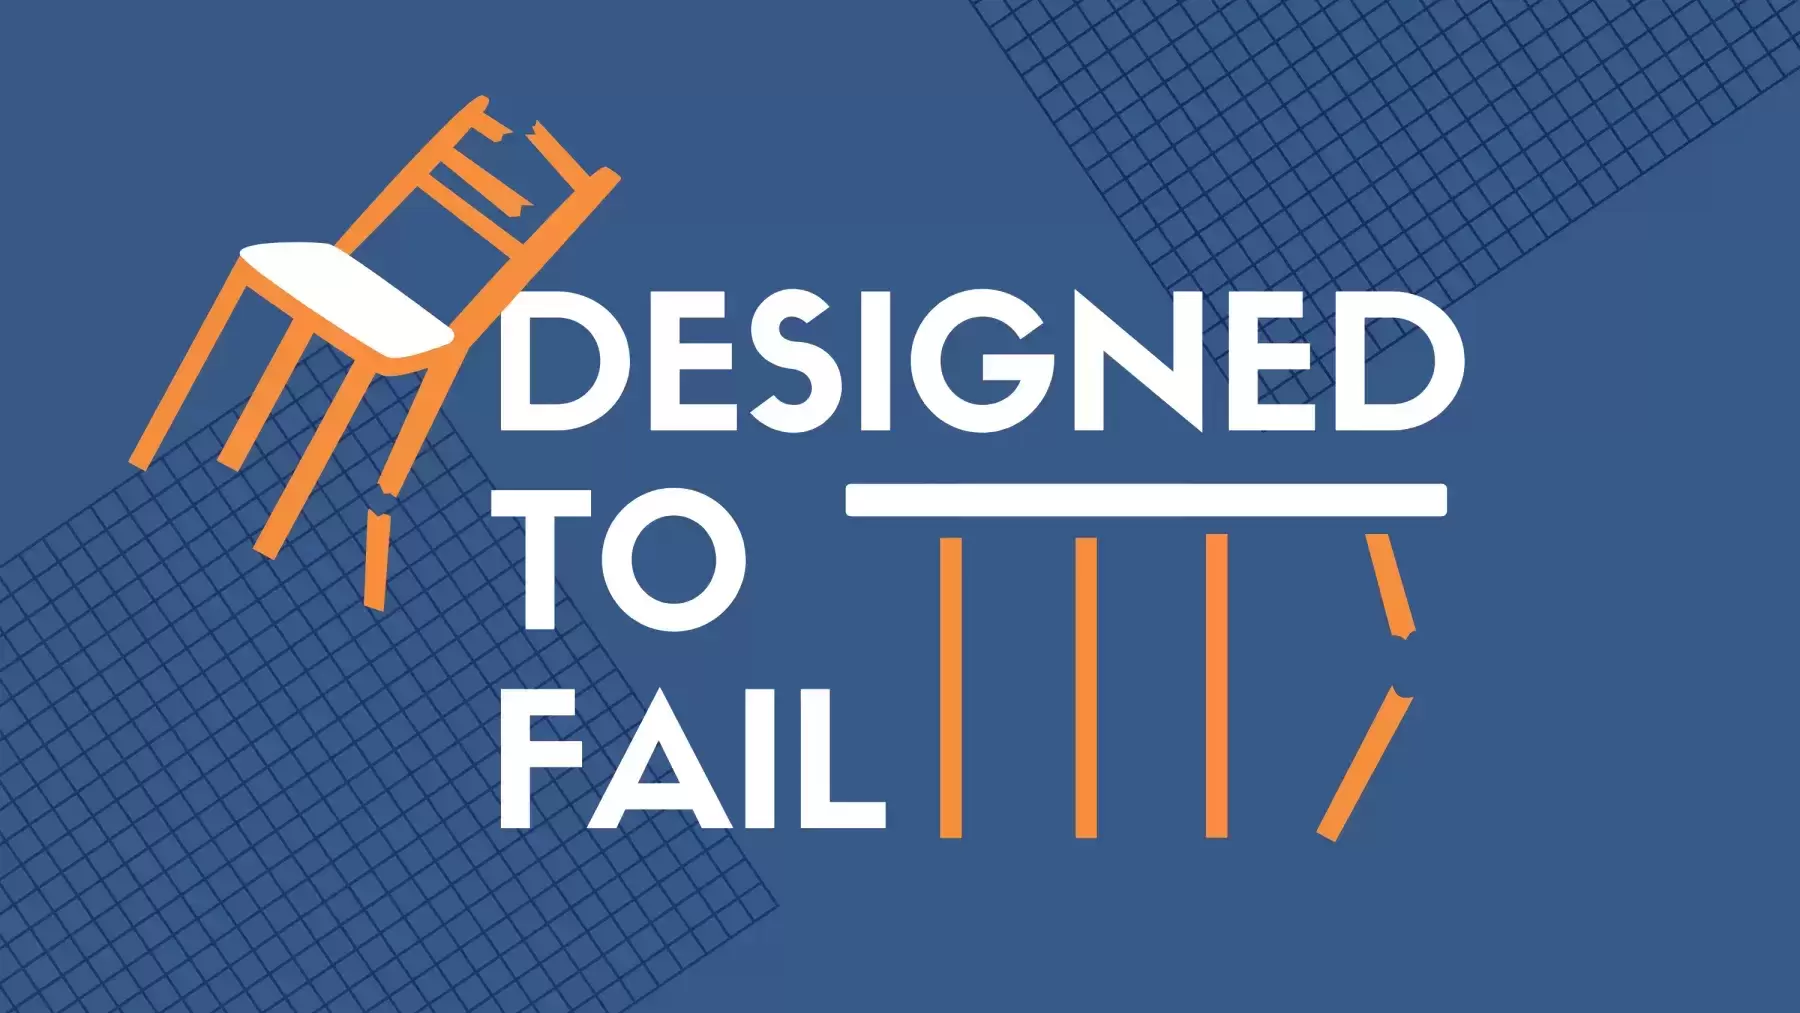 A graphical image of the words "Designed to Fail" with a broken table and chair.